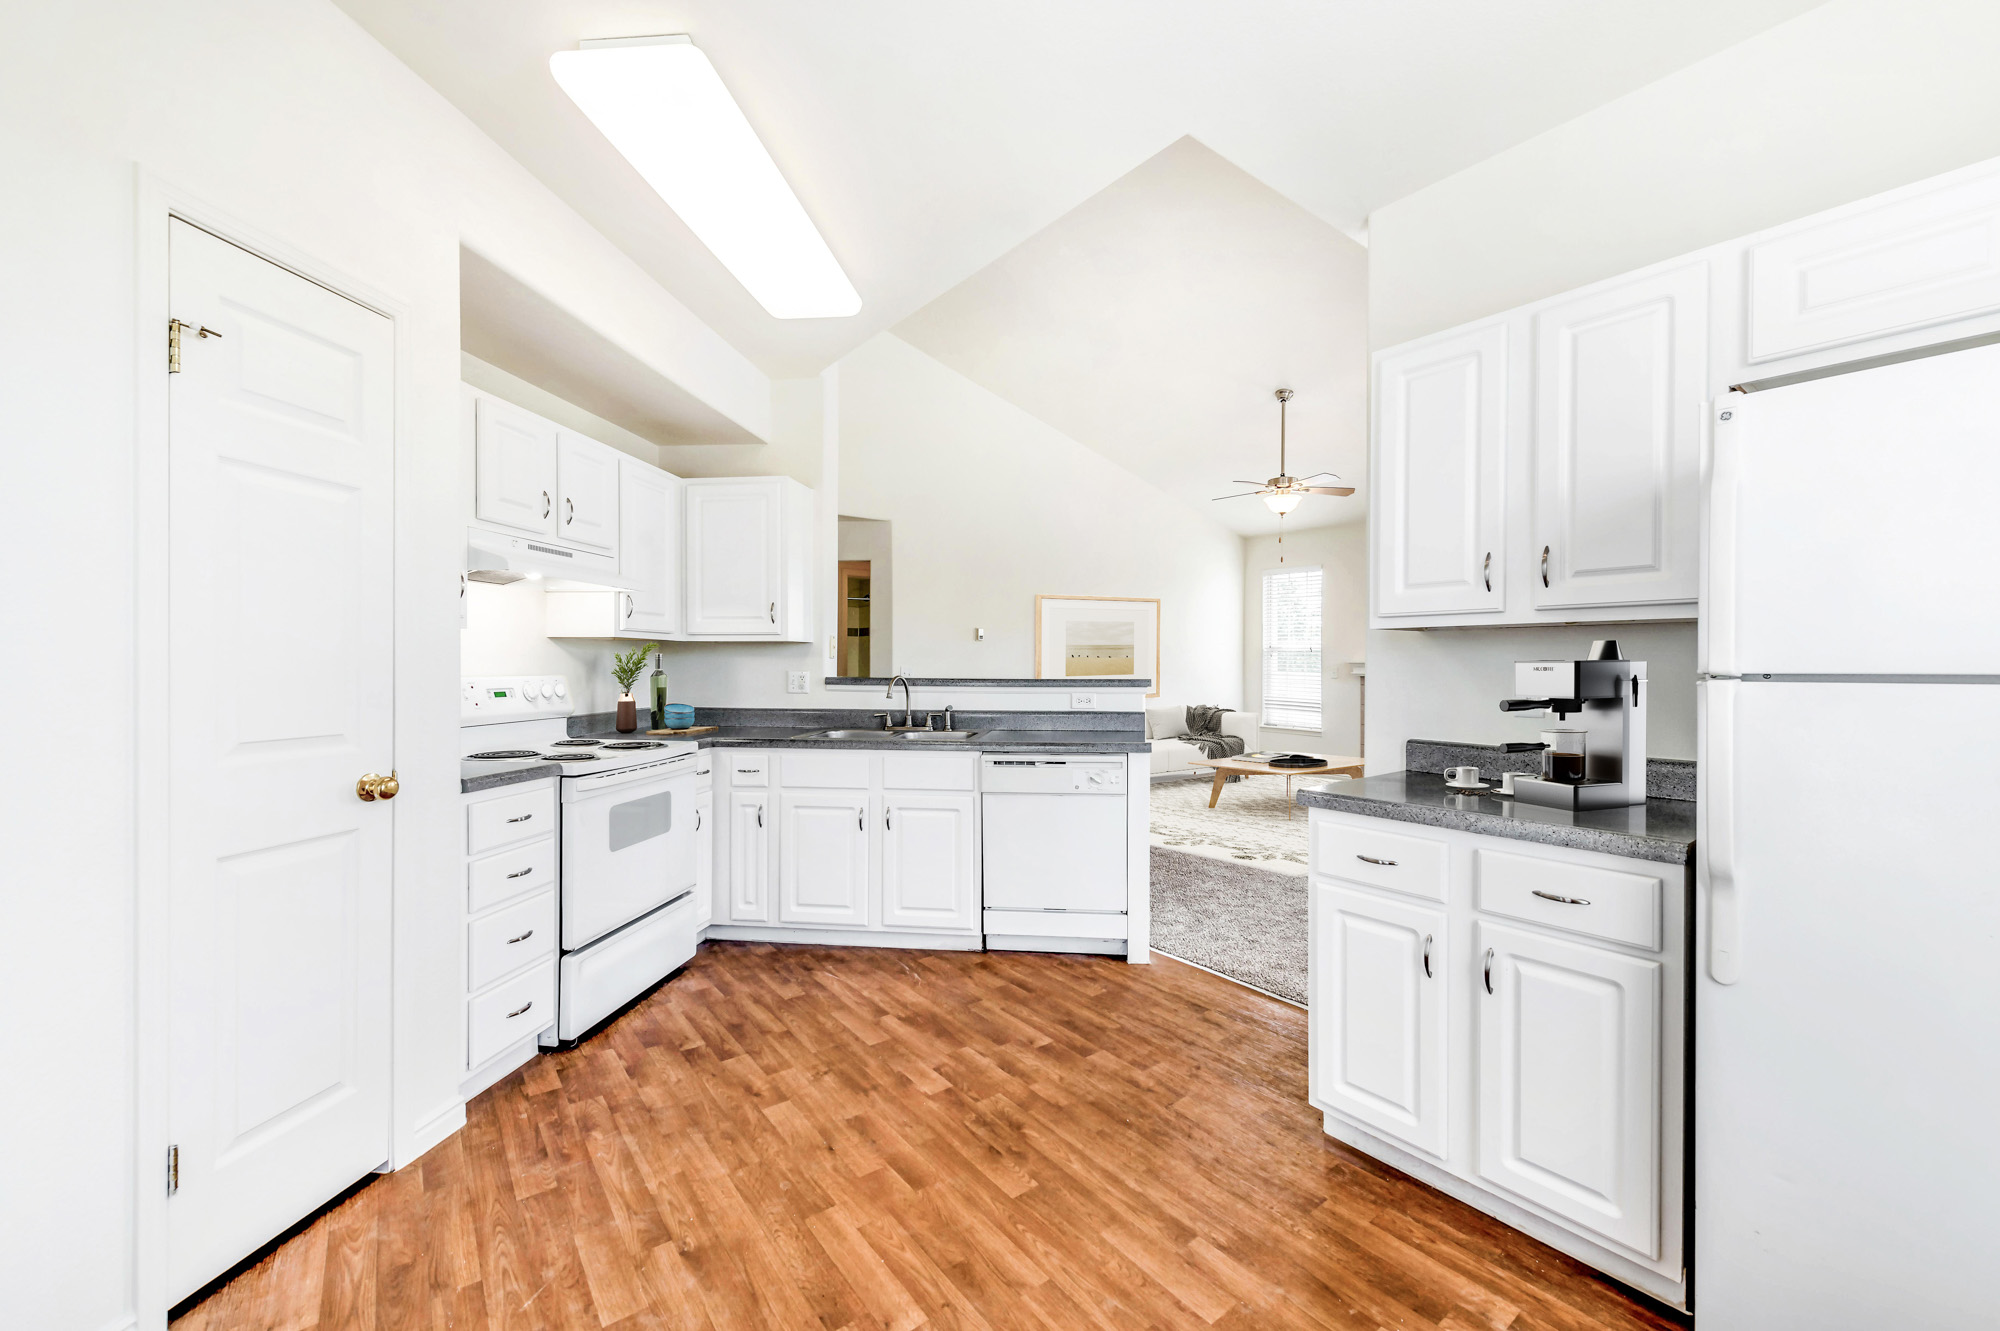 A kitchen at Eagle Ridge apartments in Denver, CO.